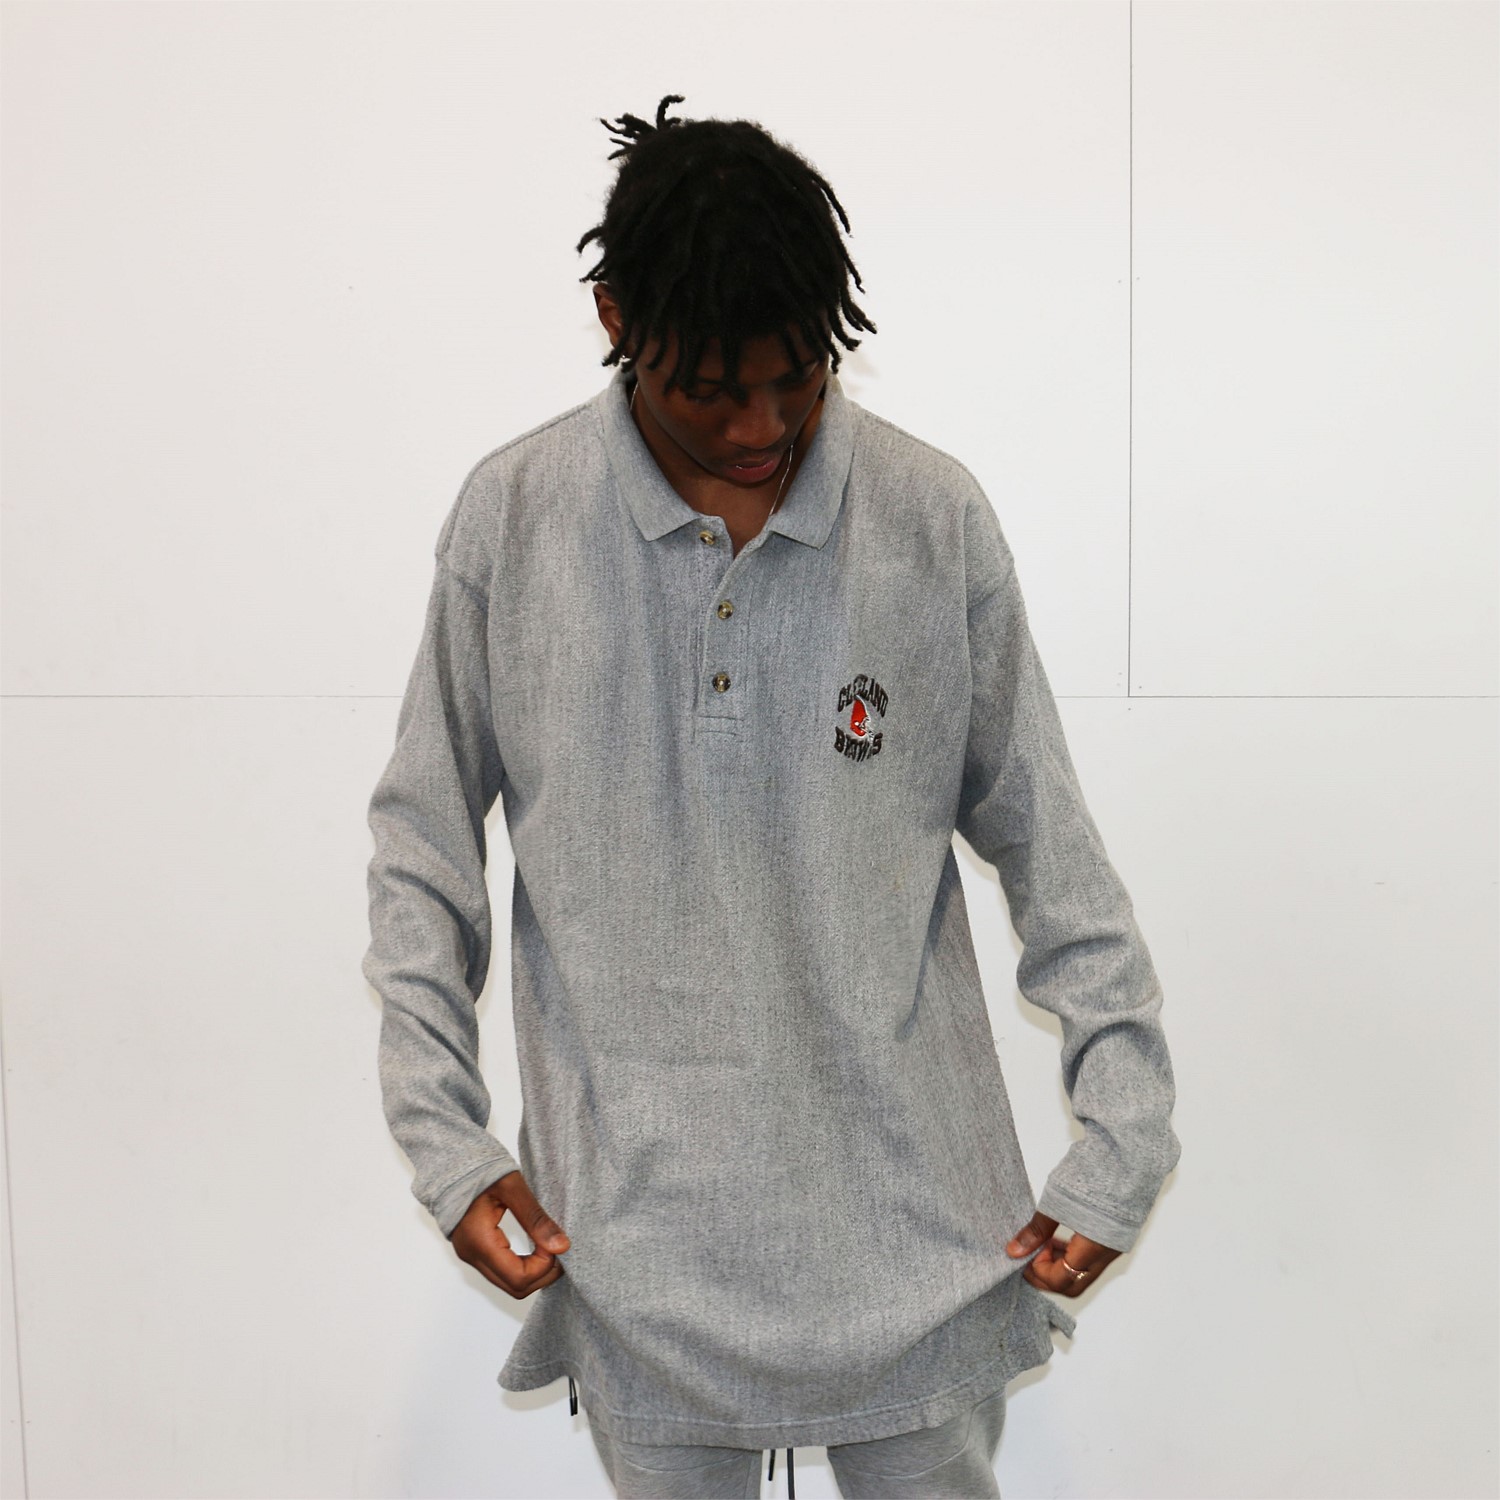 Buy > sweatshirt and button up > in stock